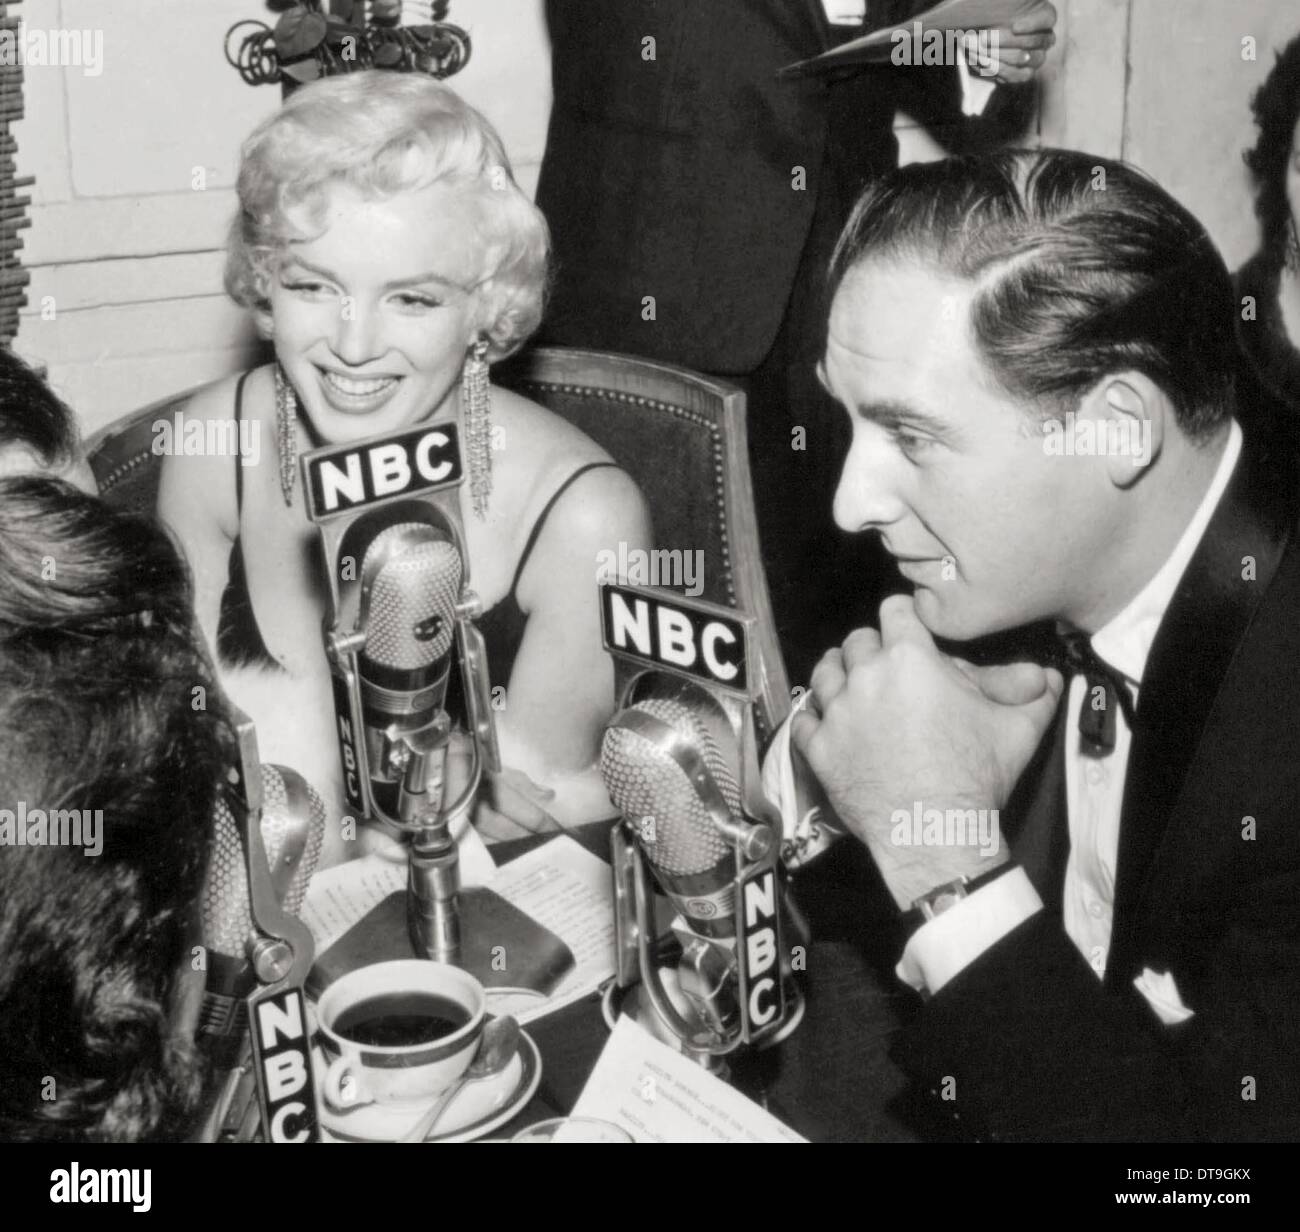 USA. television comedian Sid Caesar, who set the standard for TV comedy in the early 1950s, has died at 91, . 12th Feb, 2014. PICTURED: Dec. 8, 2002 - MARILYN MONROE and SID CAESAR during a radio interview. © Nate Cutler/Globe Photos/ZUMAPRESS.com/Alamy Live News Stock Photo